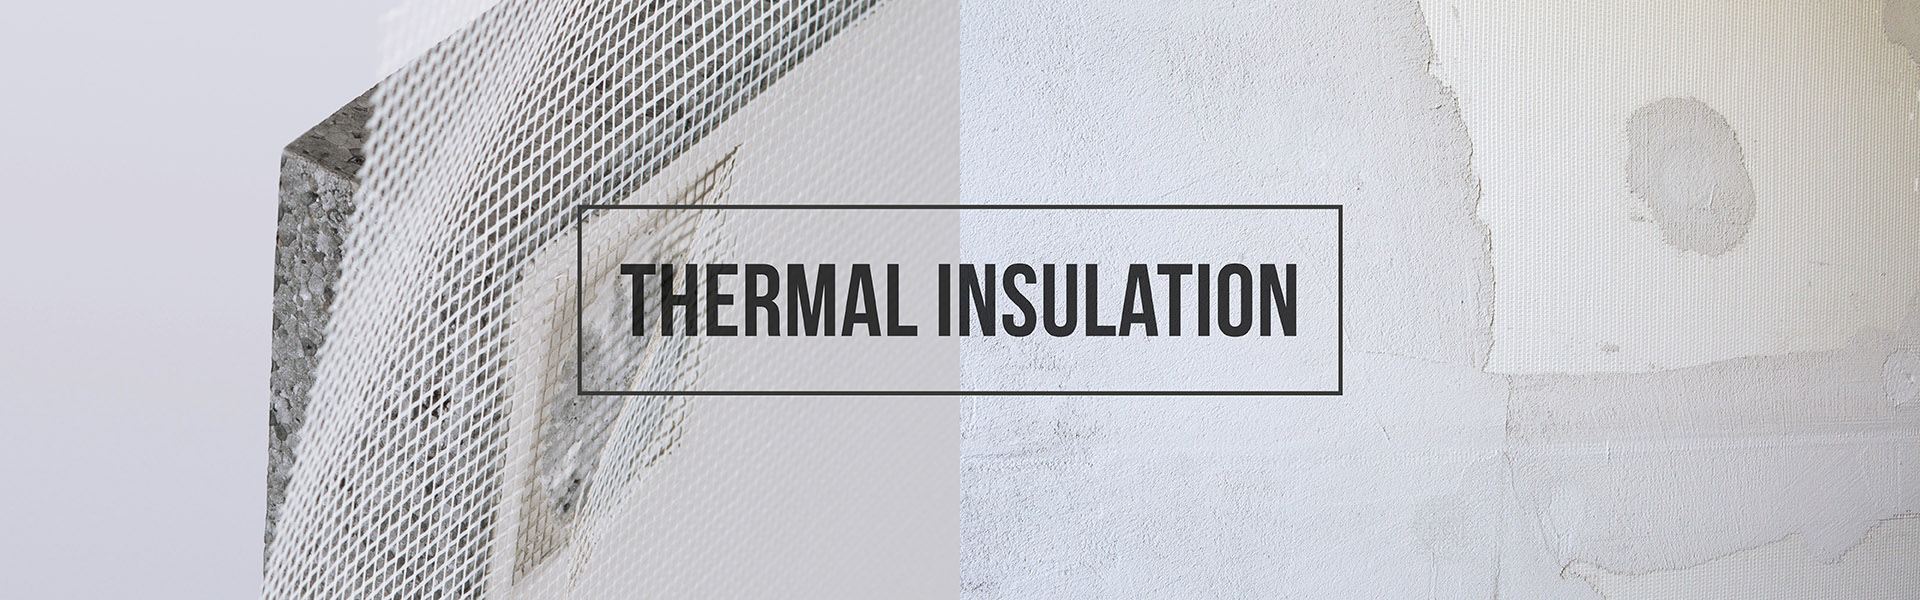 THERMAL - Insulation & Chemicals Division